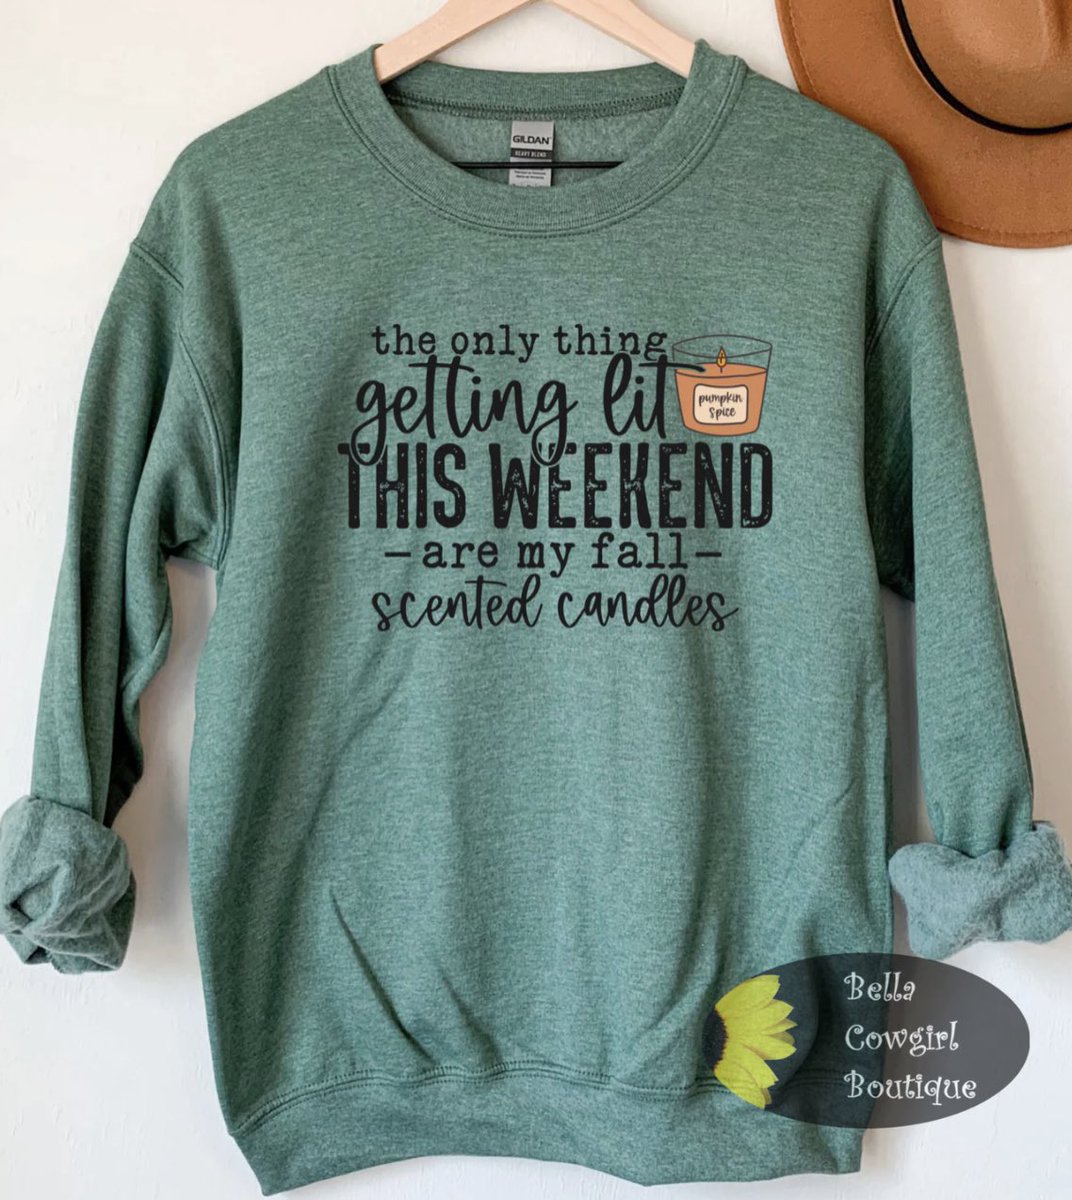 🕯️Get FREE SHIPPING when you spend $39! (No code needed!)🍁

🌻Shop👉 bellacowgirlboutique.com/products/the-o… #boutiqueshopping #boutique #texasboutique #fallvibes #itsfallyall #fallsweater #fallfinds #fallstyle #falloutfits